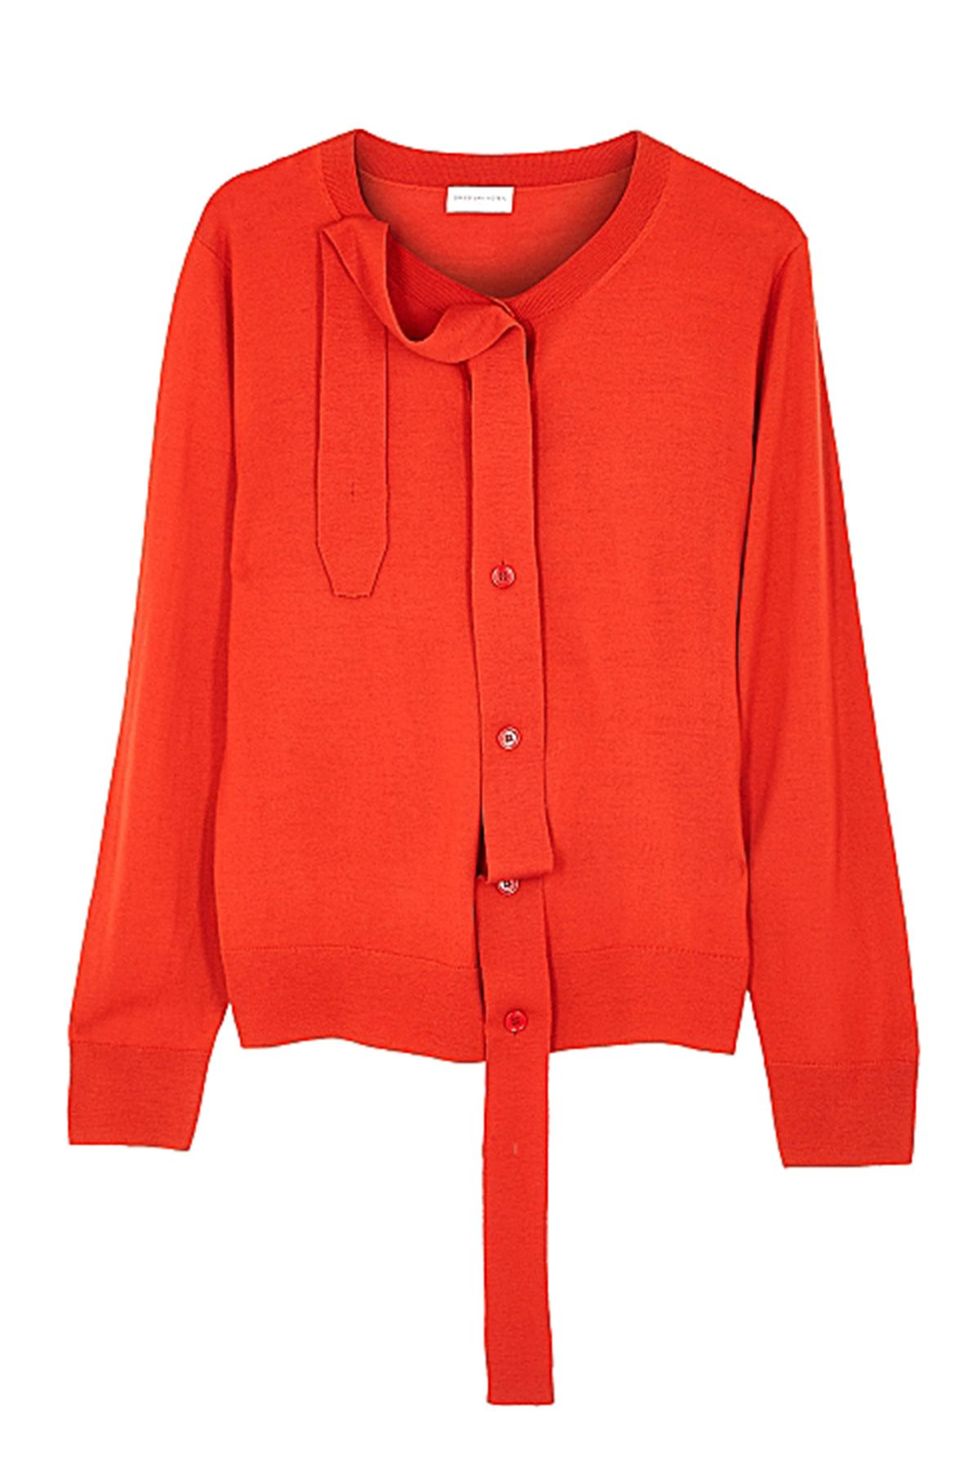 20 Best Cardigans for Women - Stylish Women's Cardigans for Fall 2021